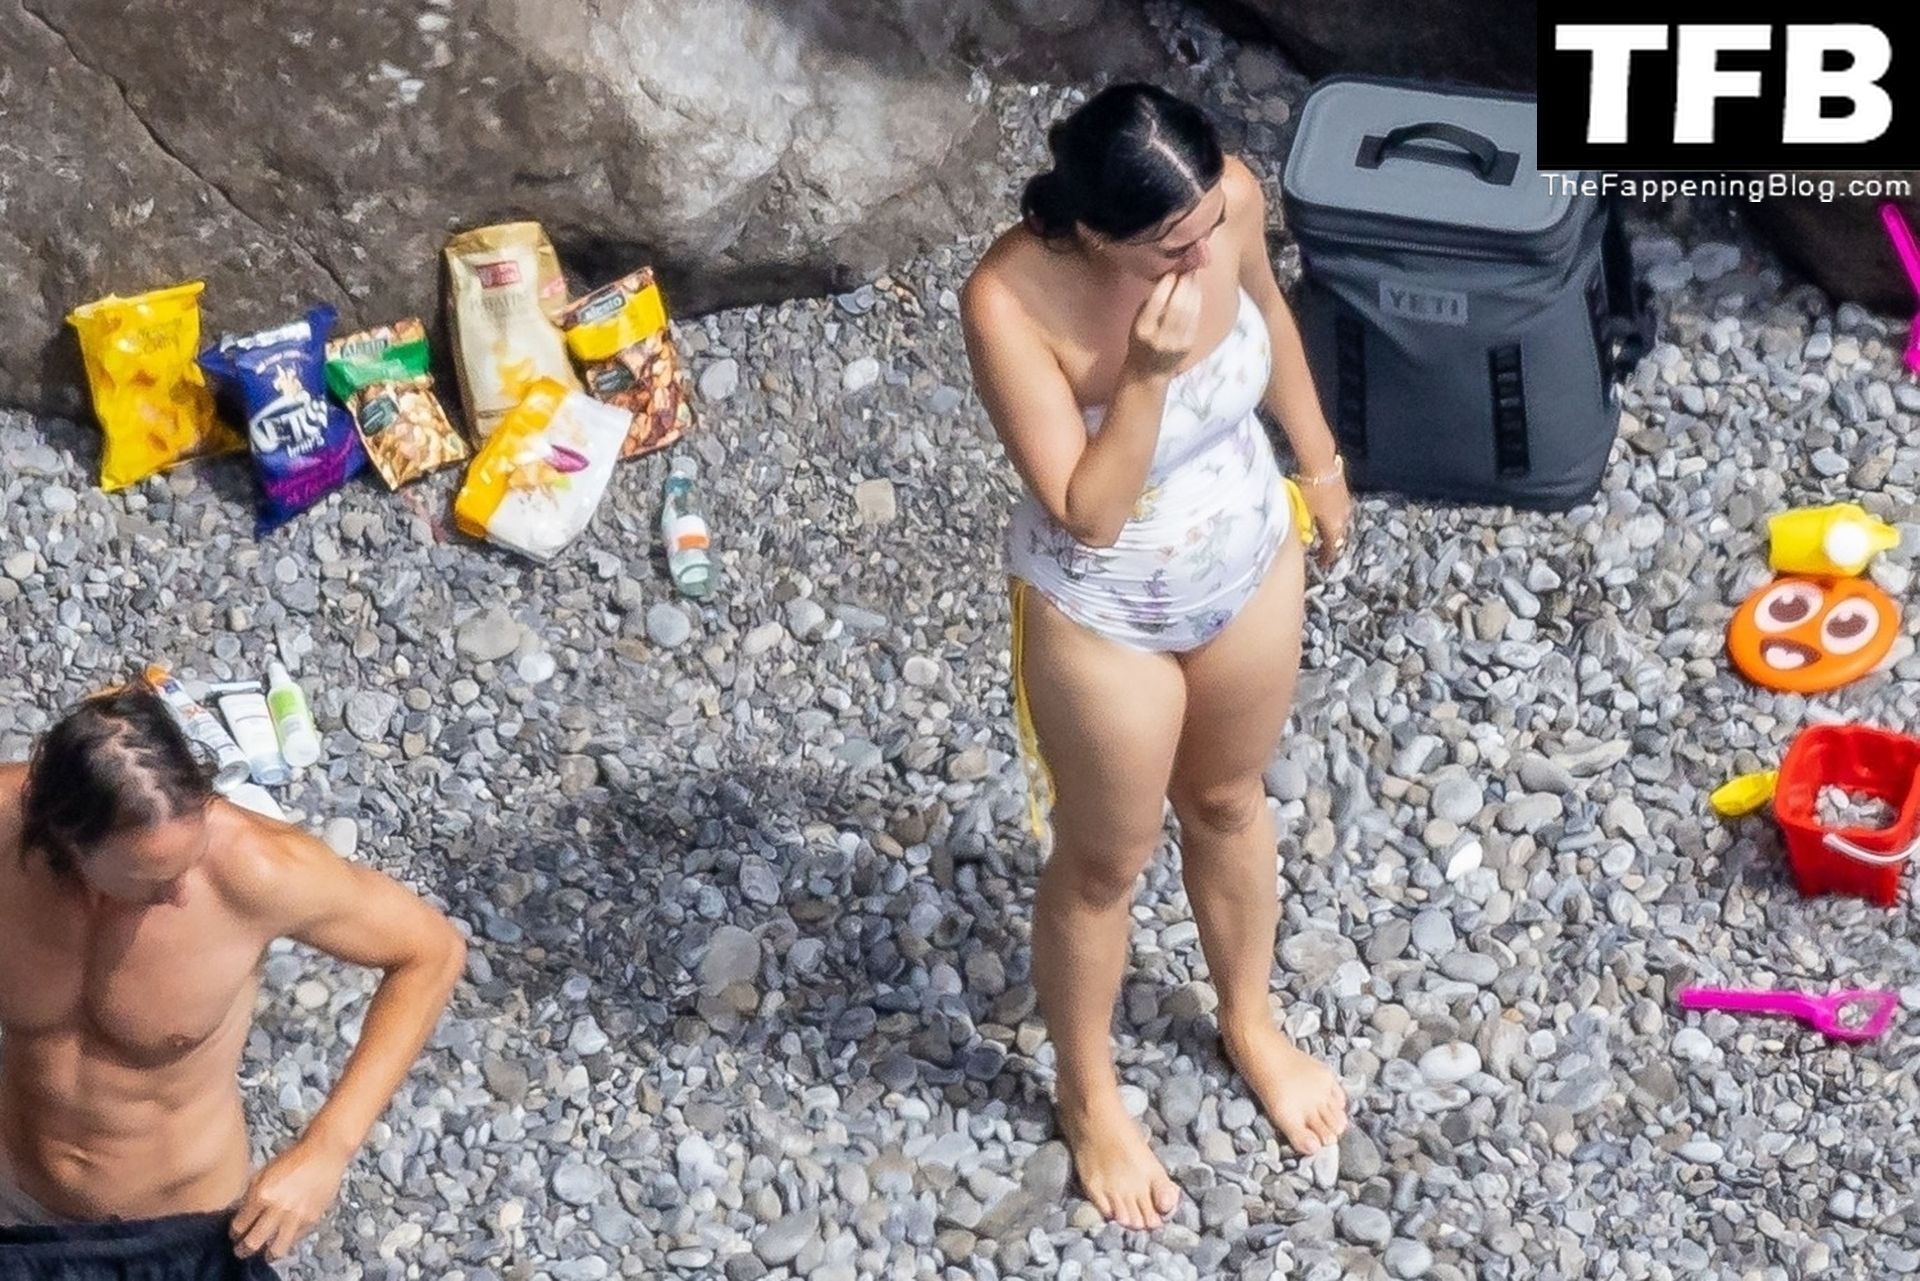 Katy Perry Sexy The Fappening Blog 53 - Katy Perry Rocks a Strapless Swimsuit While Enjoying a Beach Day with Orlando Bloom in Positano (105 Photos)